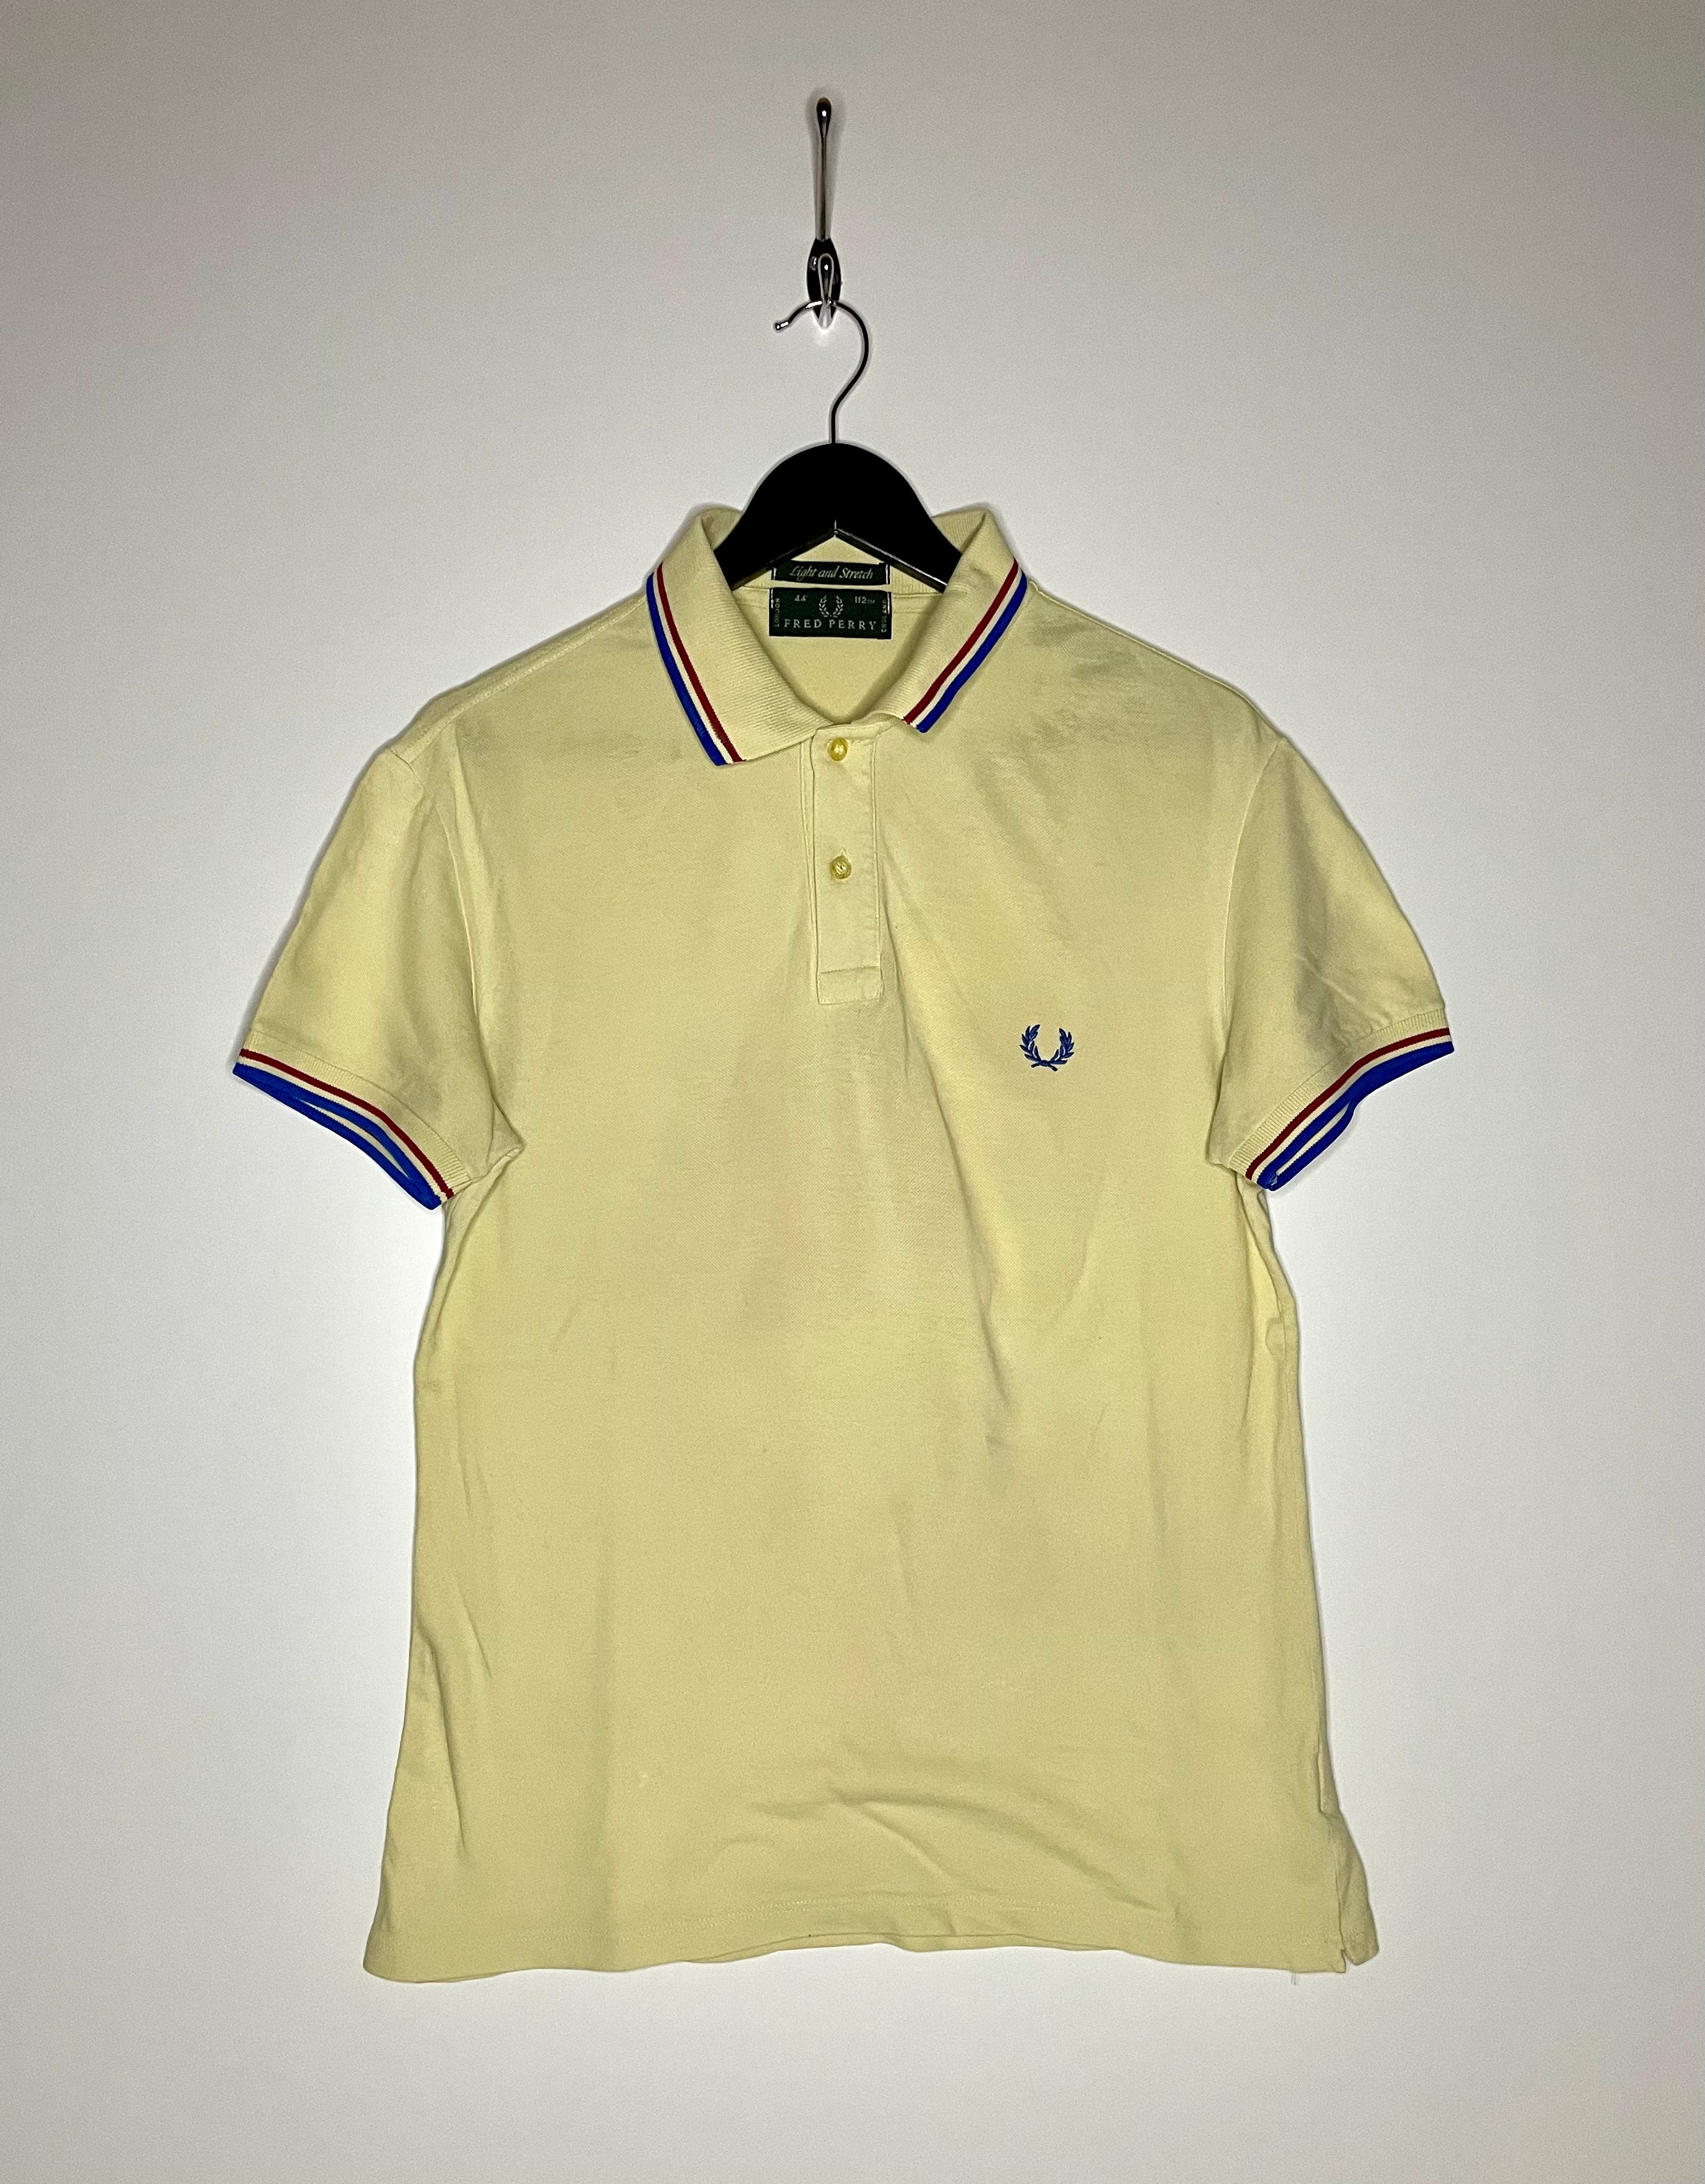 Fred Perry Vintage Polo Shirt Yellow Size M